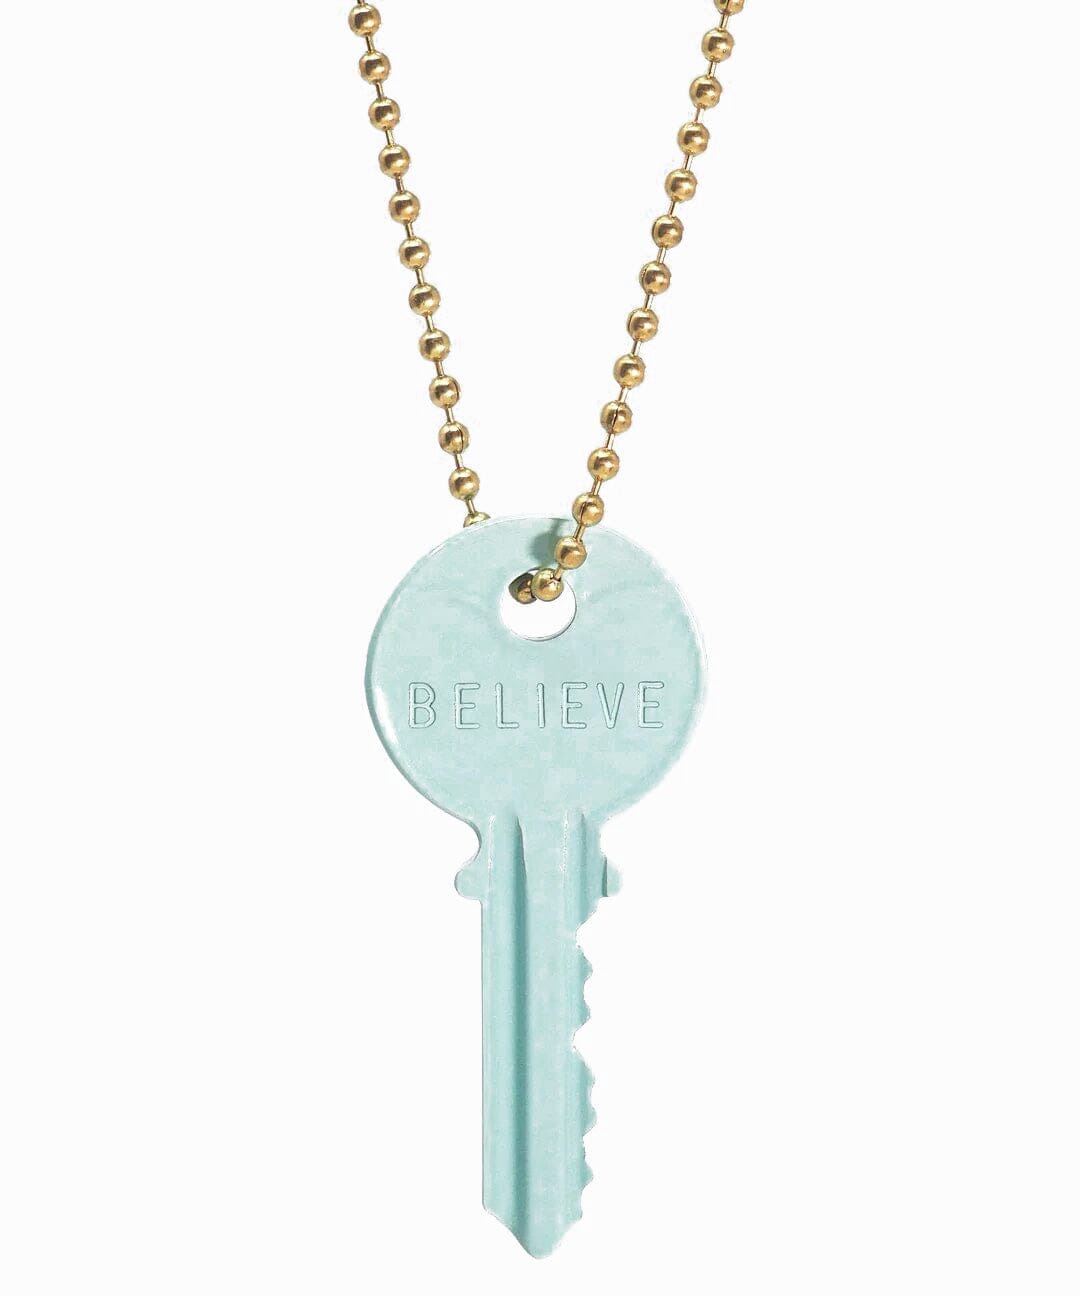 N - Pastel Green Classic Ball Chain Key Necklace Necklaces The Giving Keys Gold 